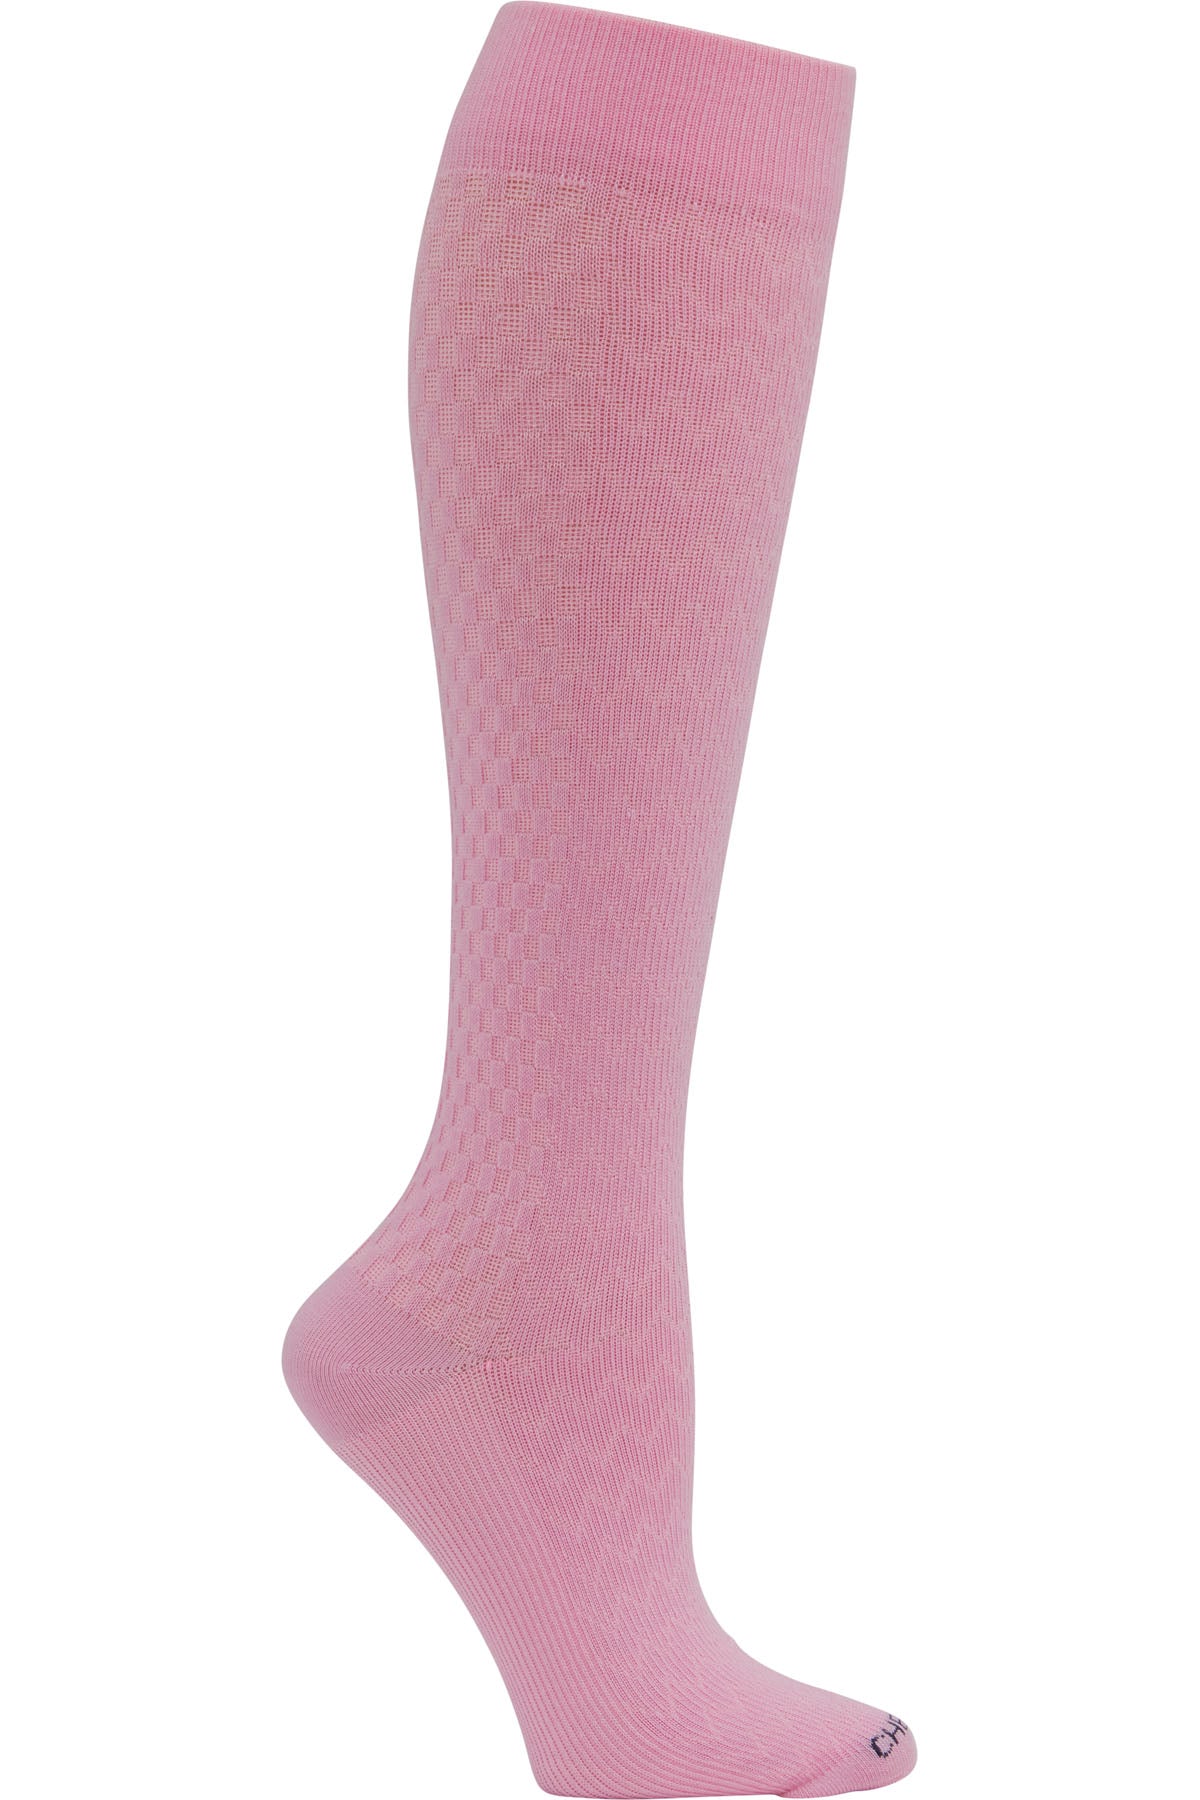 Cherokee Mild Compression Socks True Support 10-15 mmHg in Carnation at Parker's Clothing and Shoes.